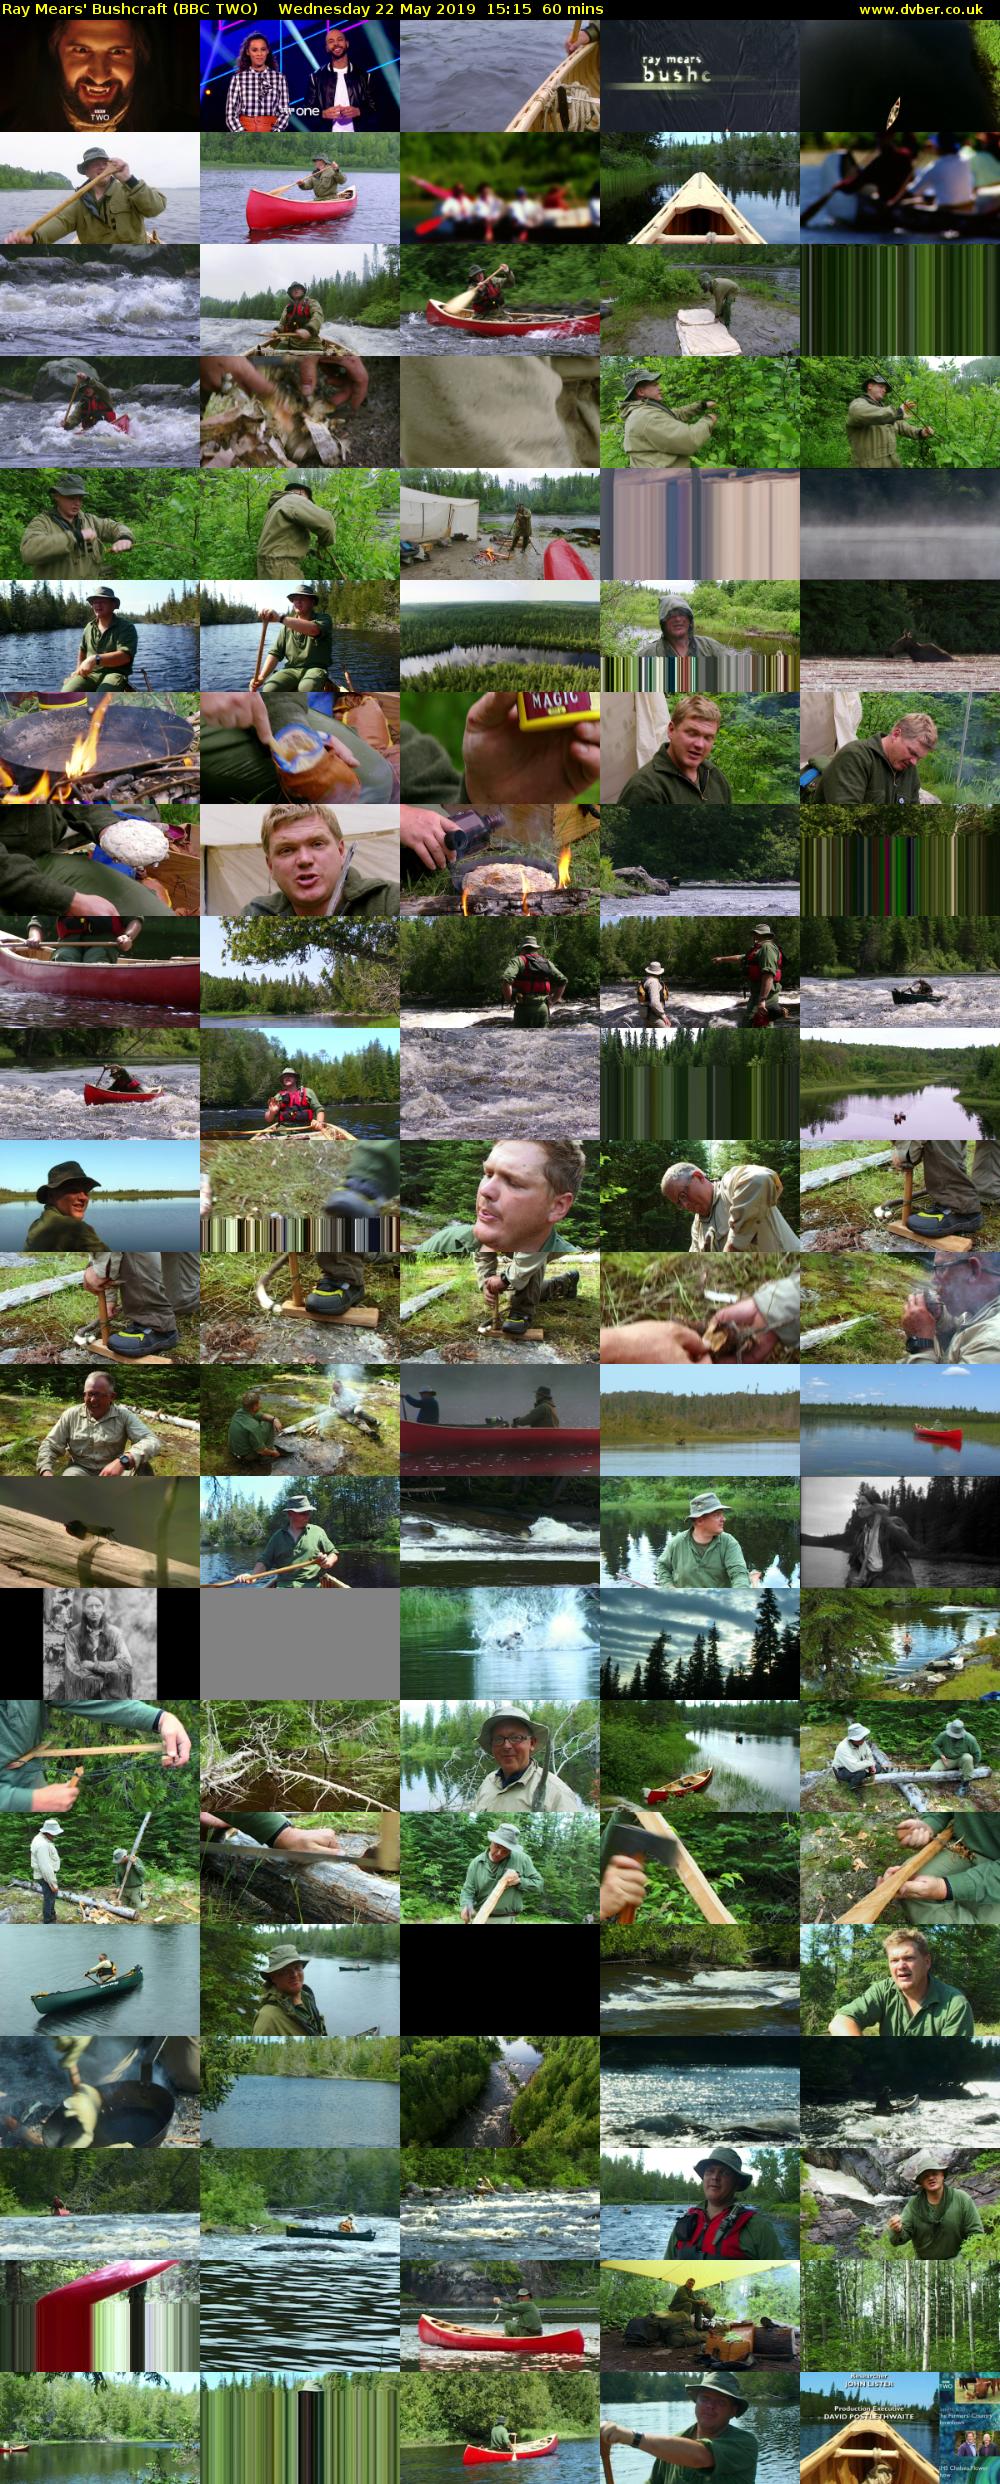 Ray Mears' Bushcraft (BBC TWO) Wednesday 22 May 2019 15:15 - 16:15